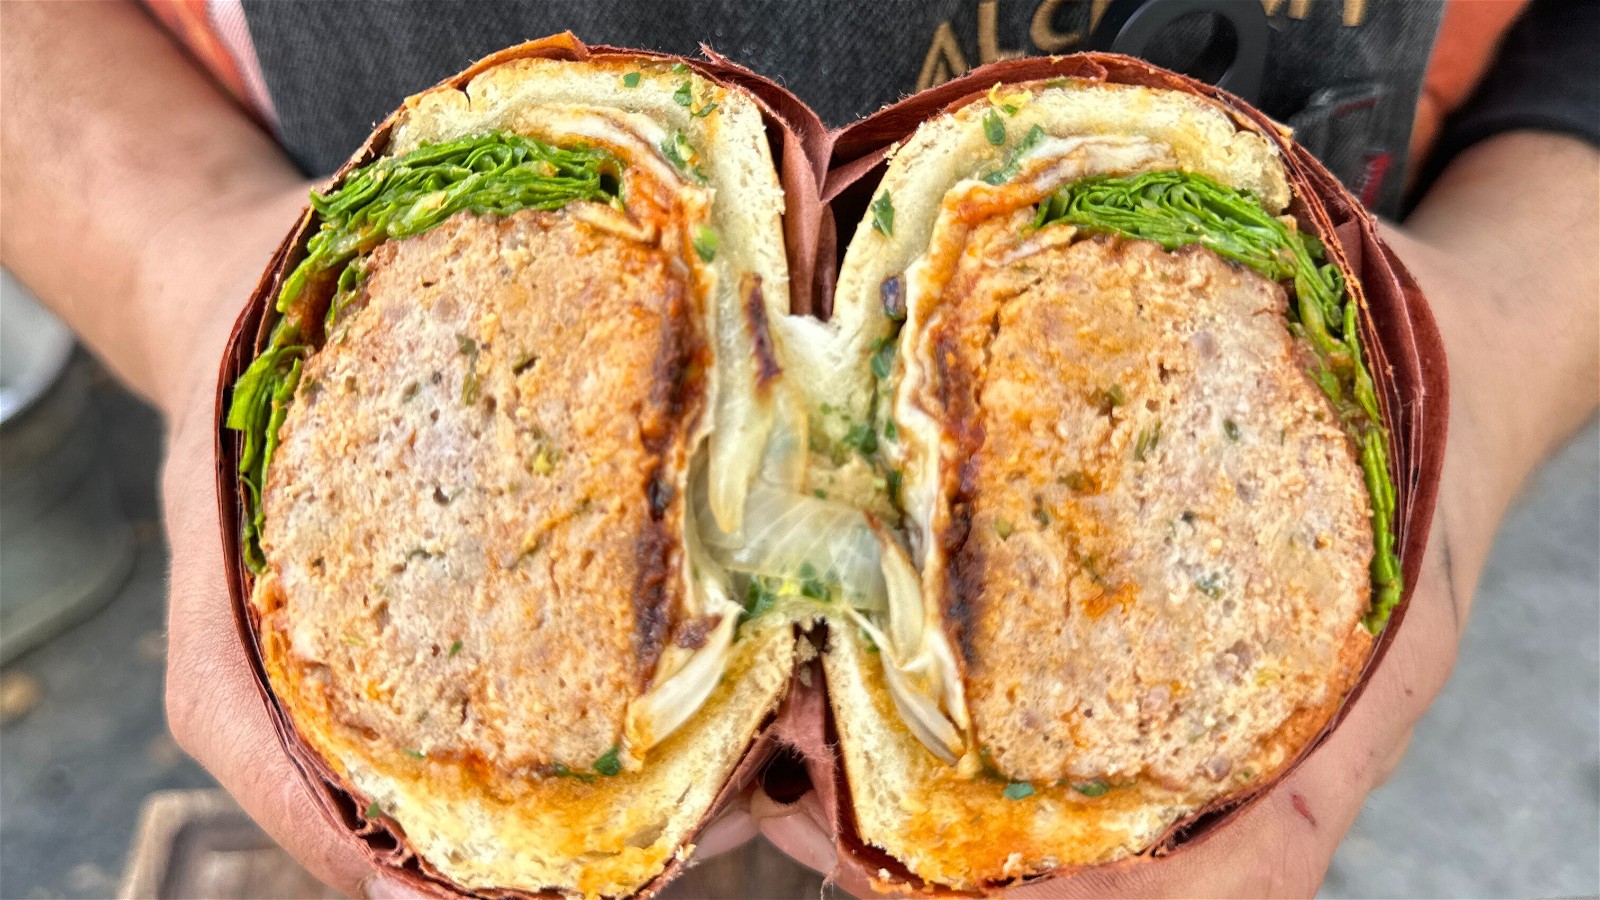 Image of Meatball Subs